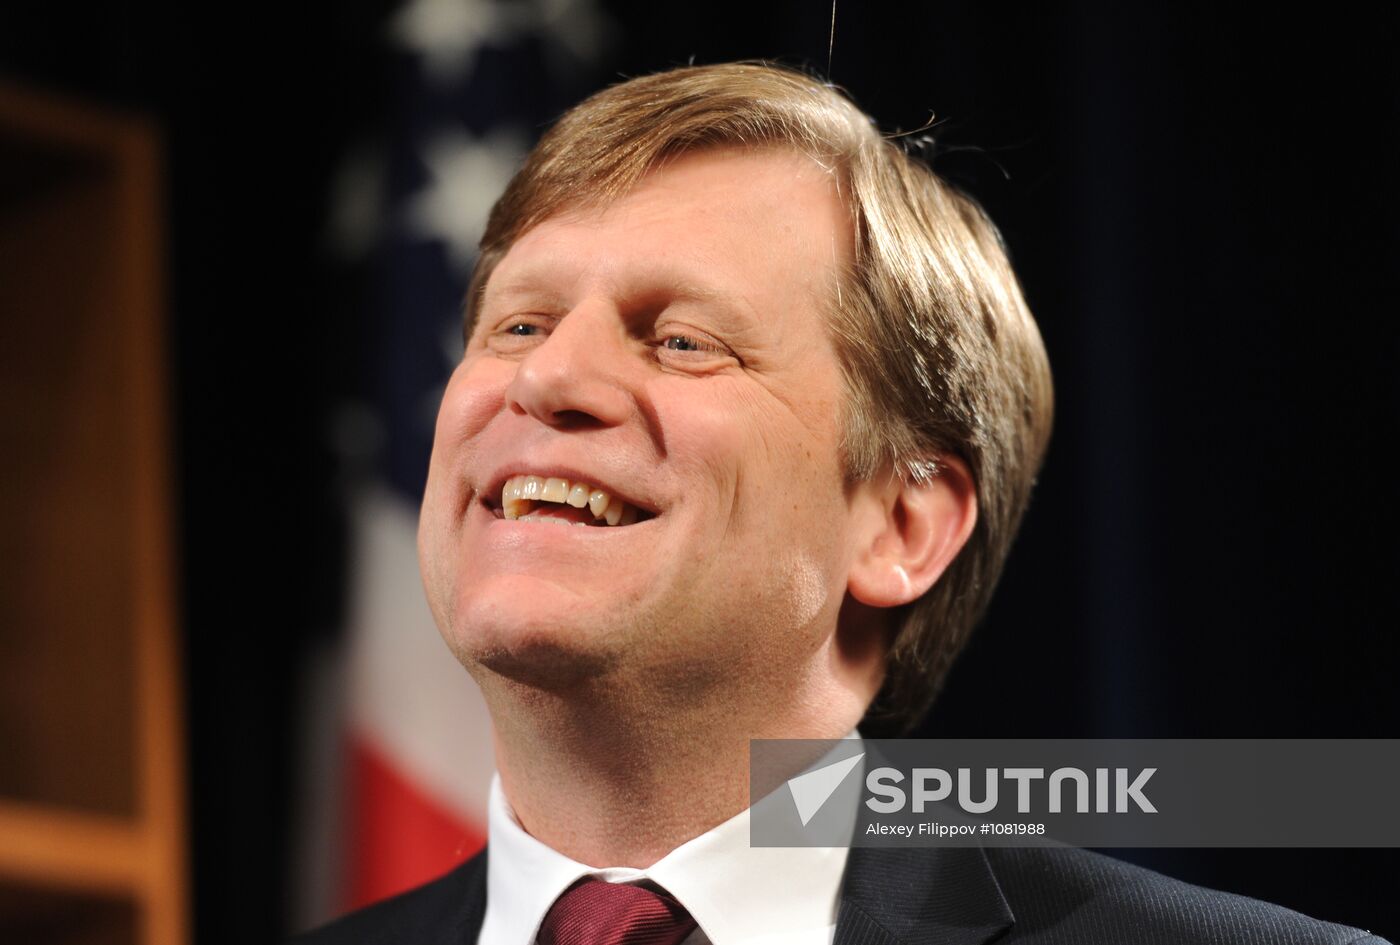 U.S. Ambassador to Russia Michael McFaul gives interview